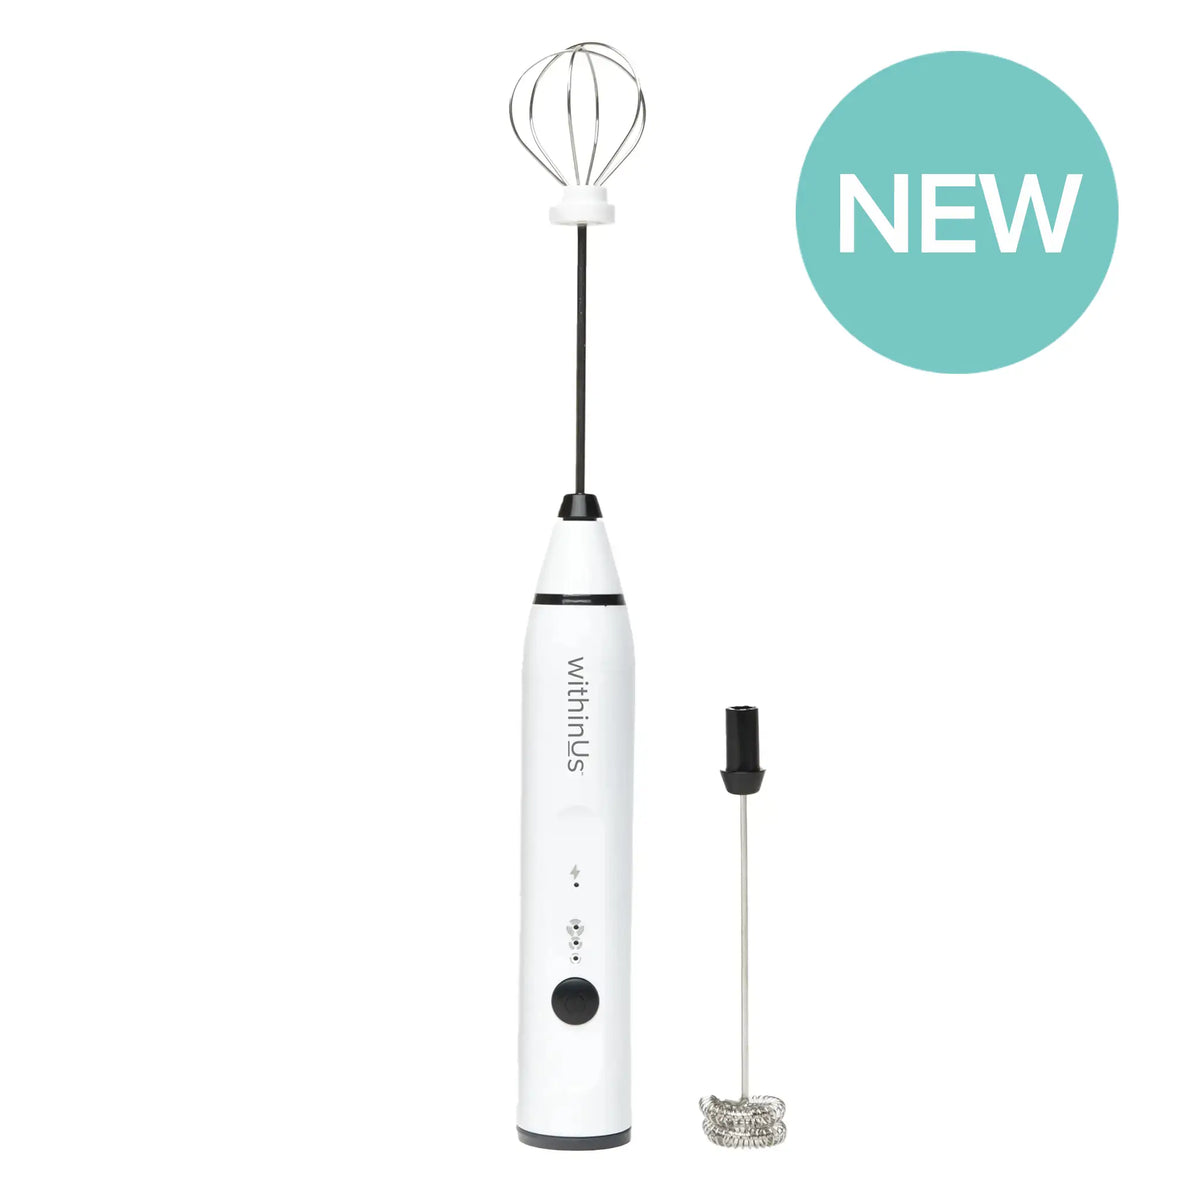 Rechargeable Handheld Milk Frother, with 3 Speed & 3